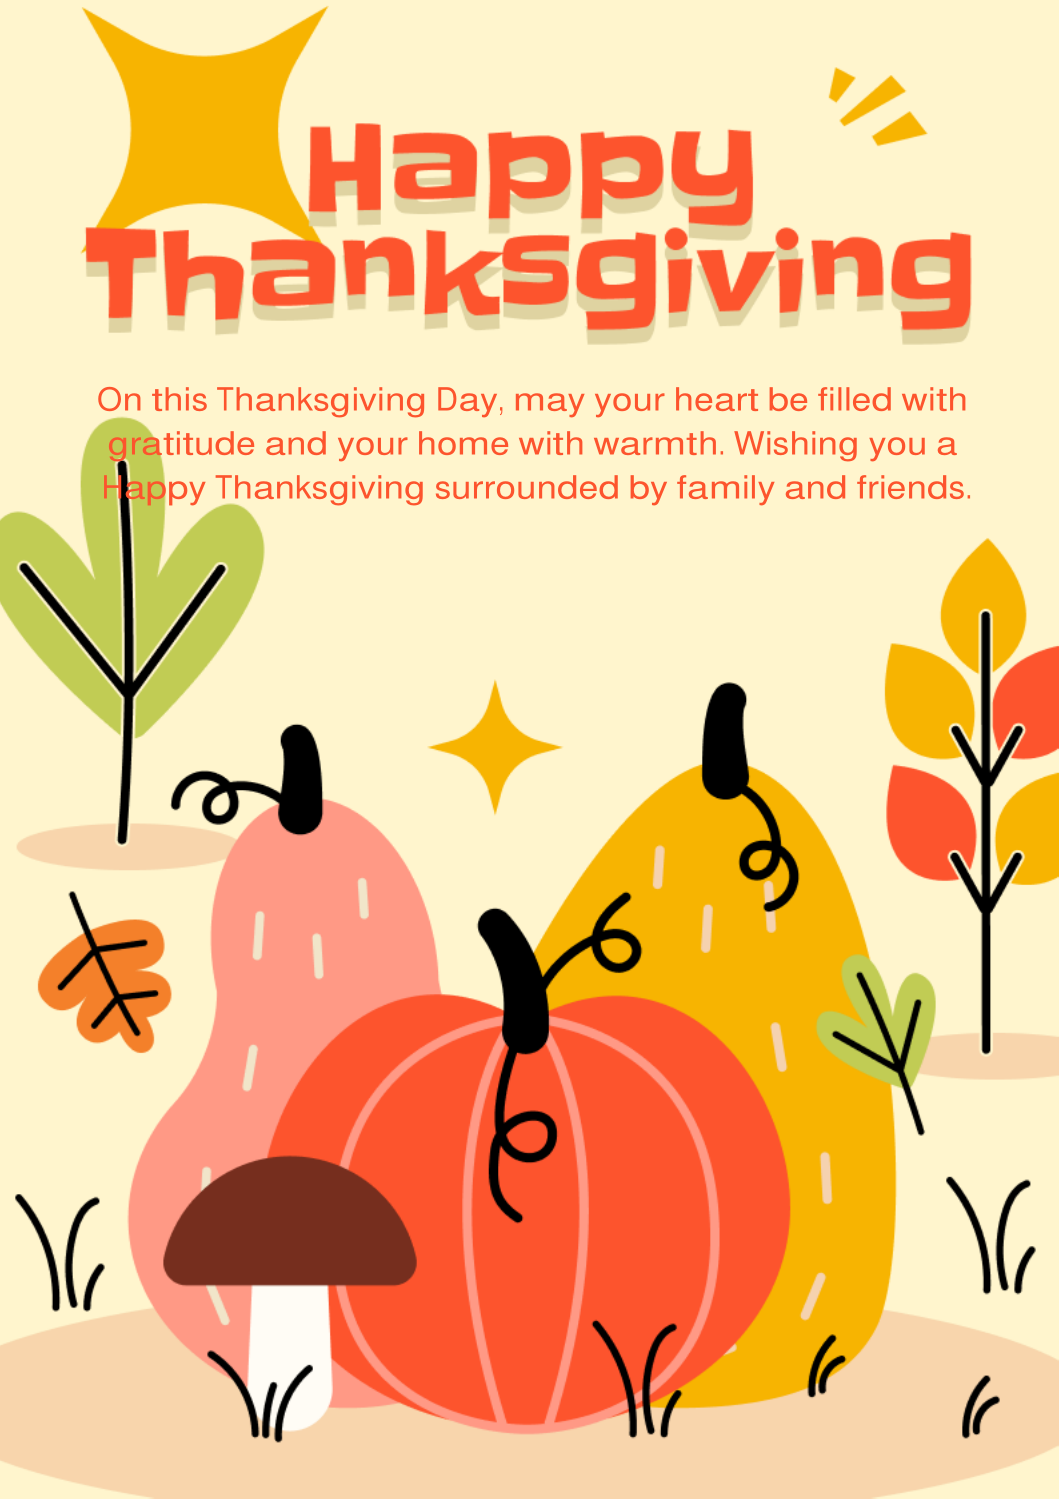 Thankgiving messages to employees